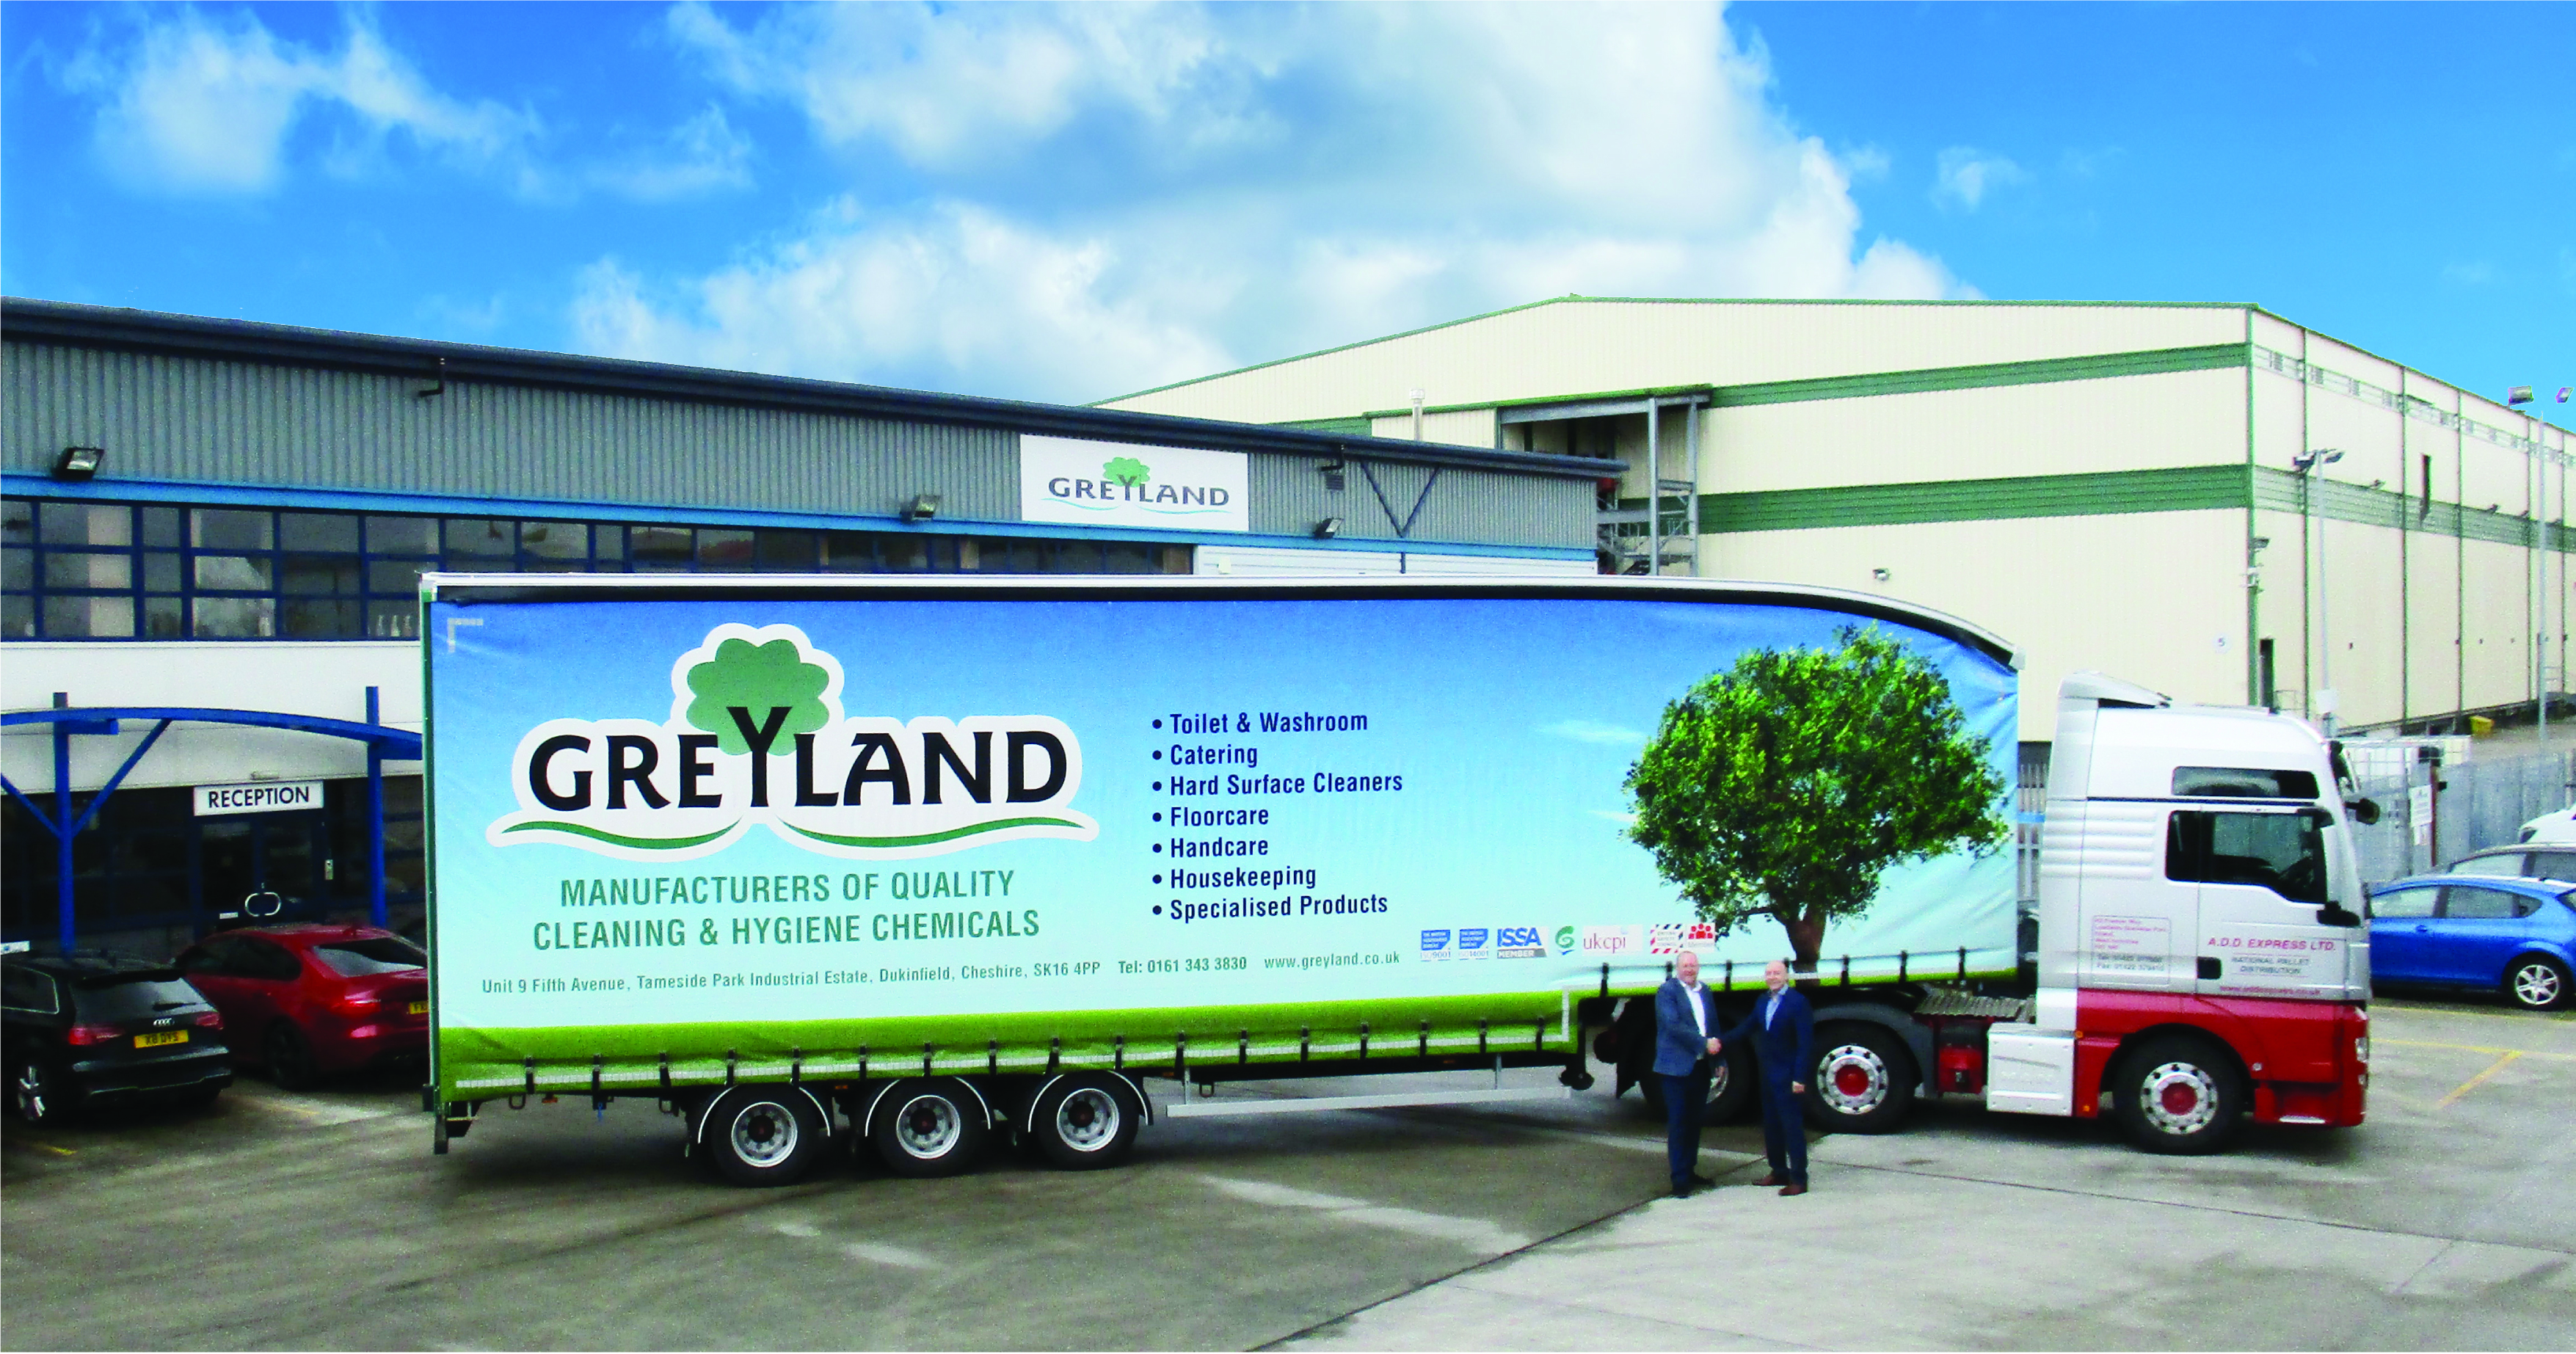 Greyland remains open for business